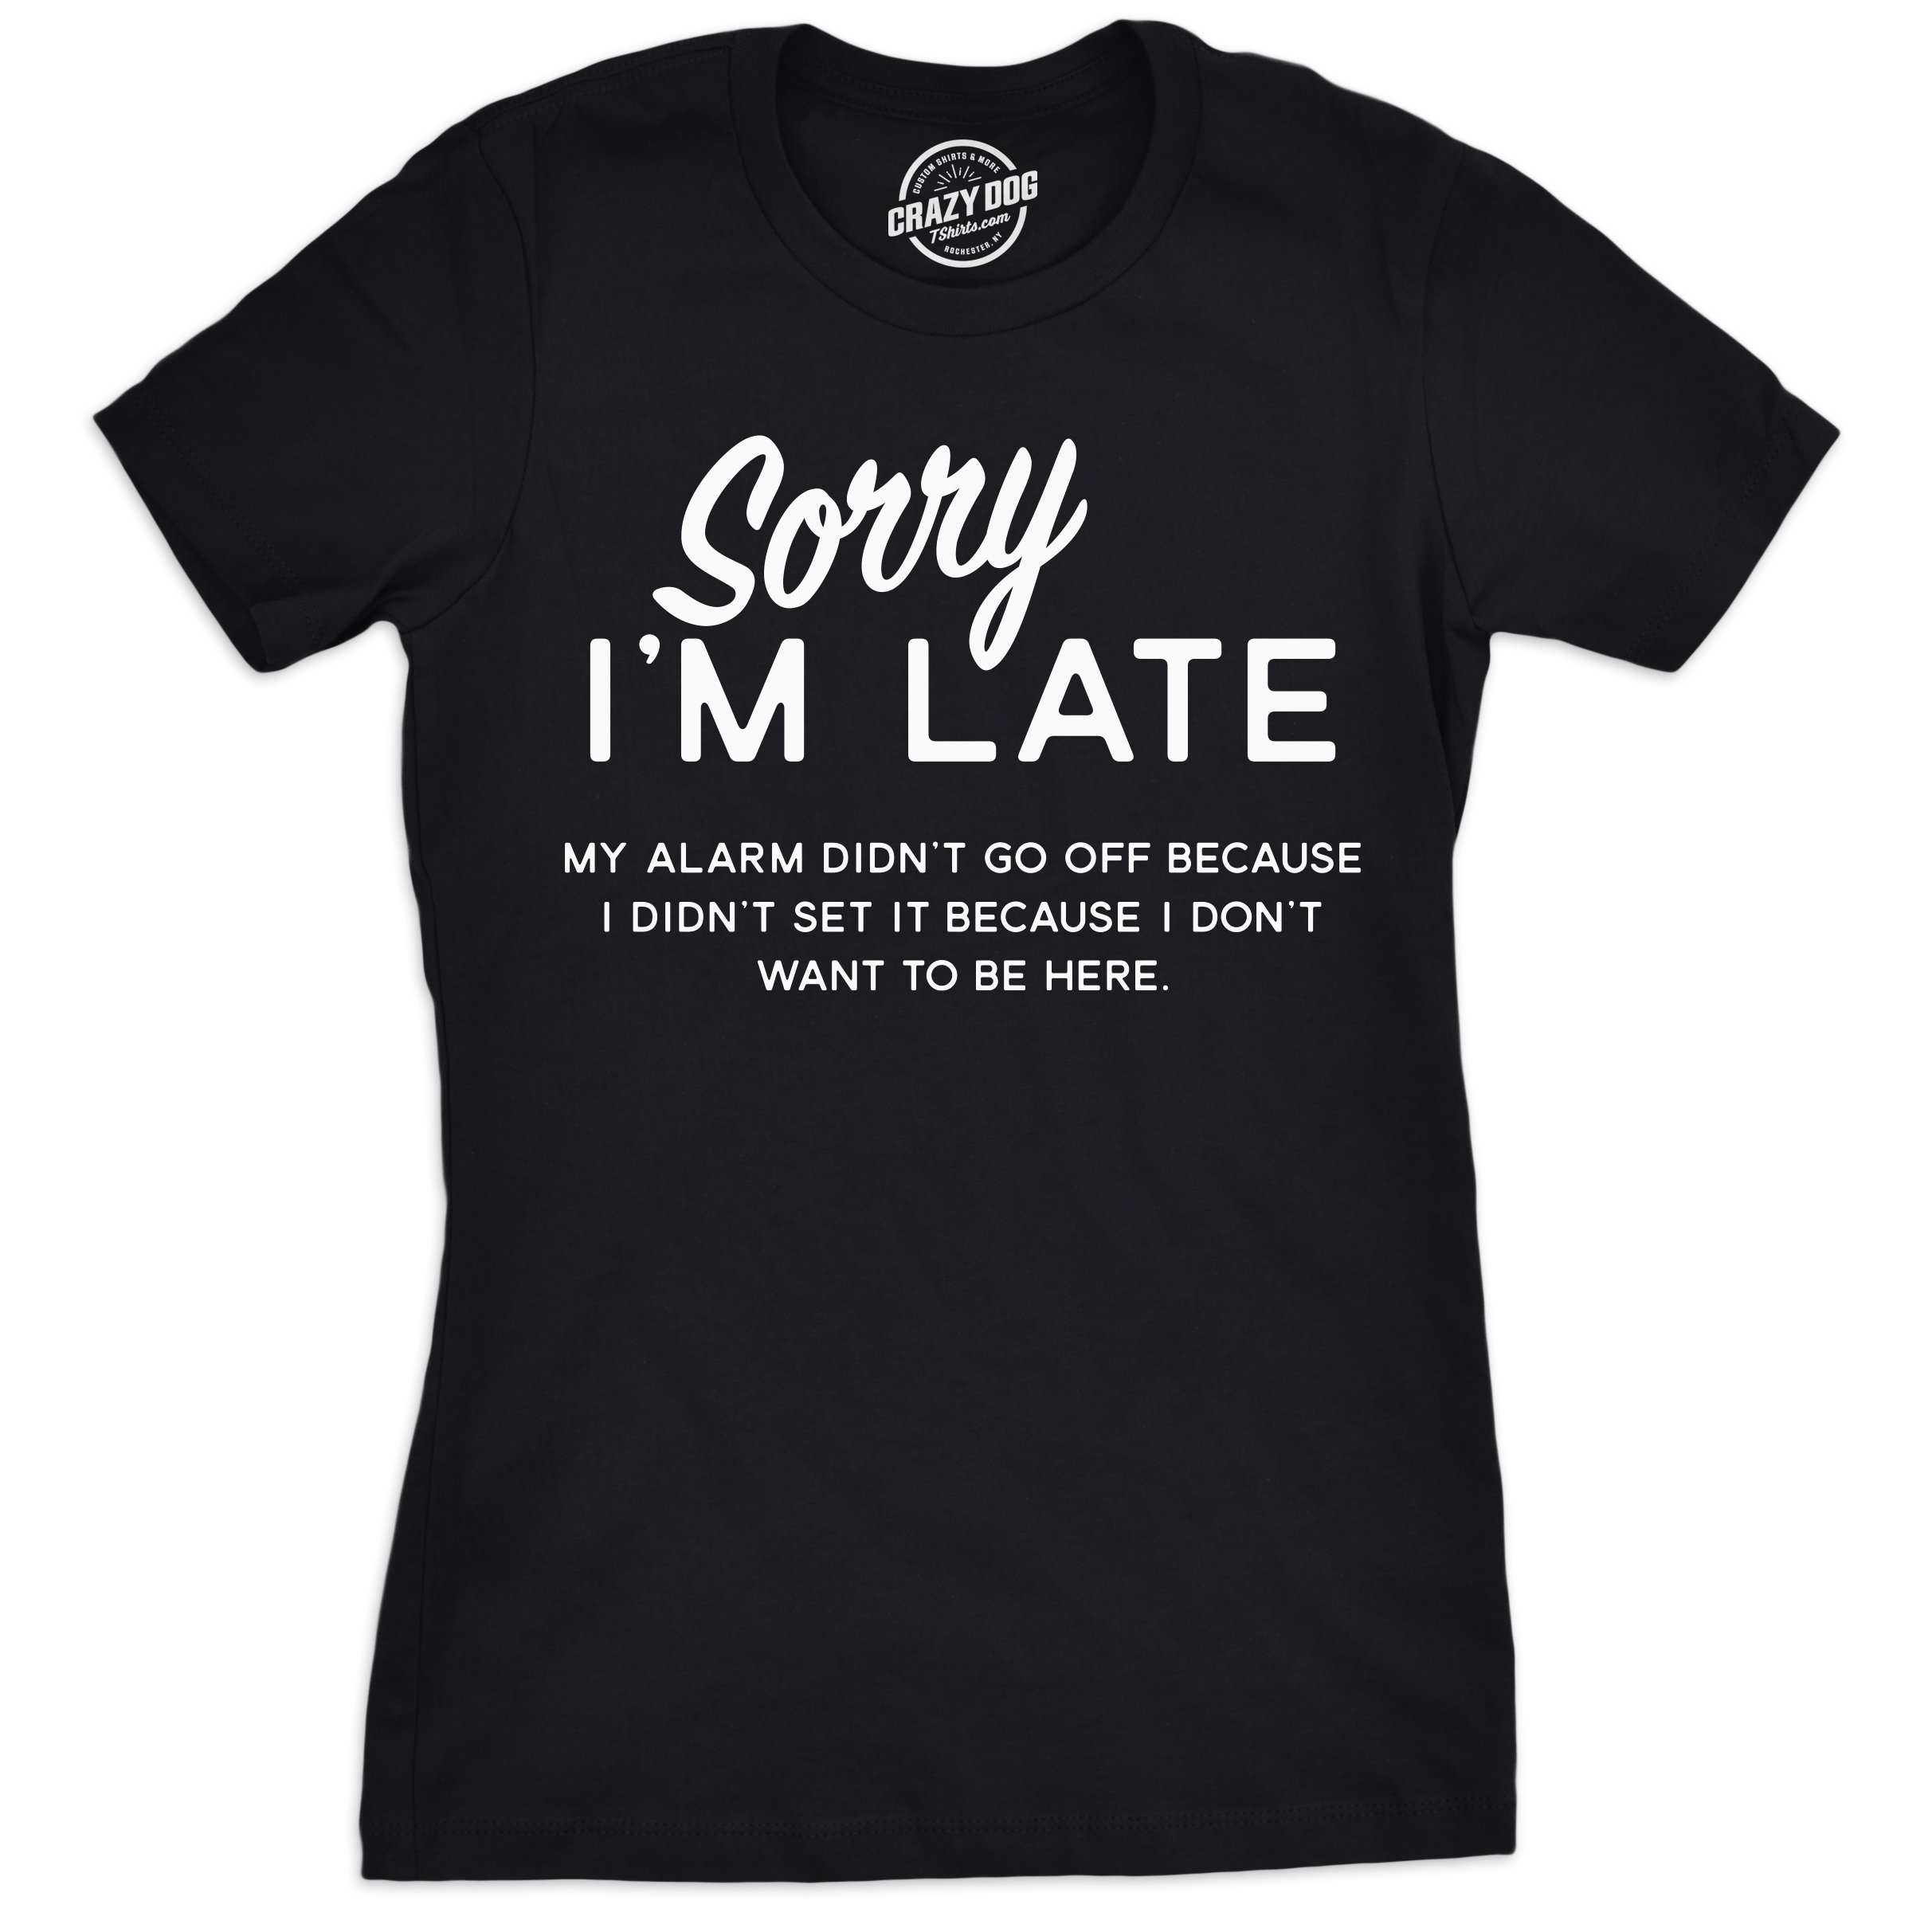 Sorry Im Late Shirt, Sarcastic Shirts Women, Shirts With Funny Sayings ...